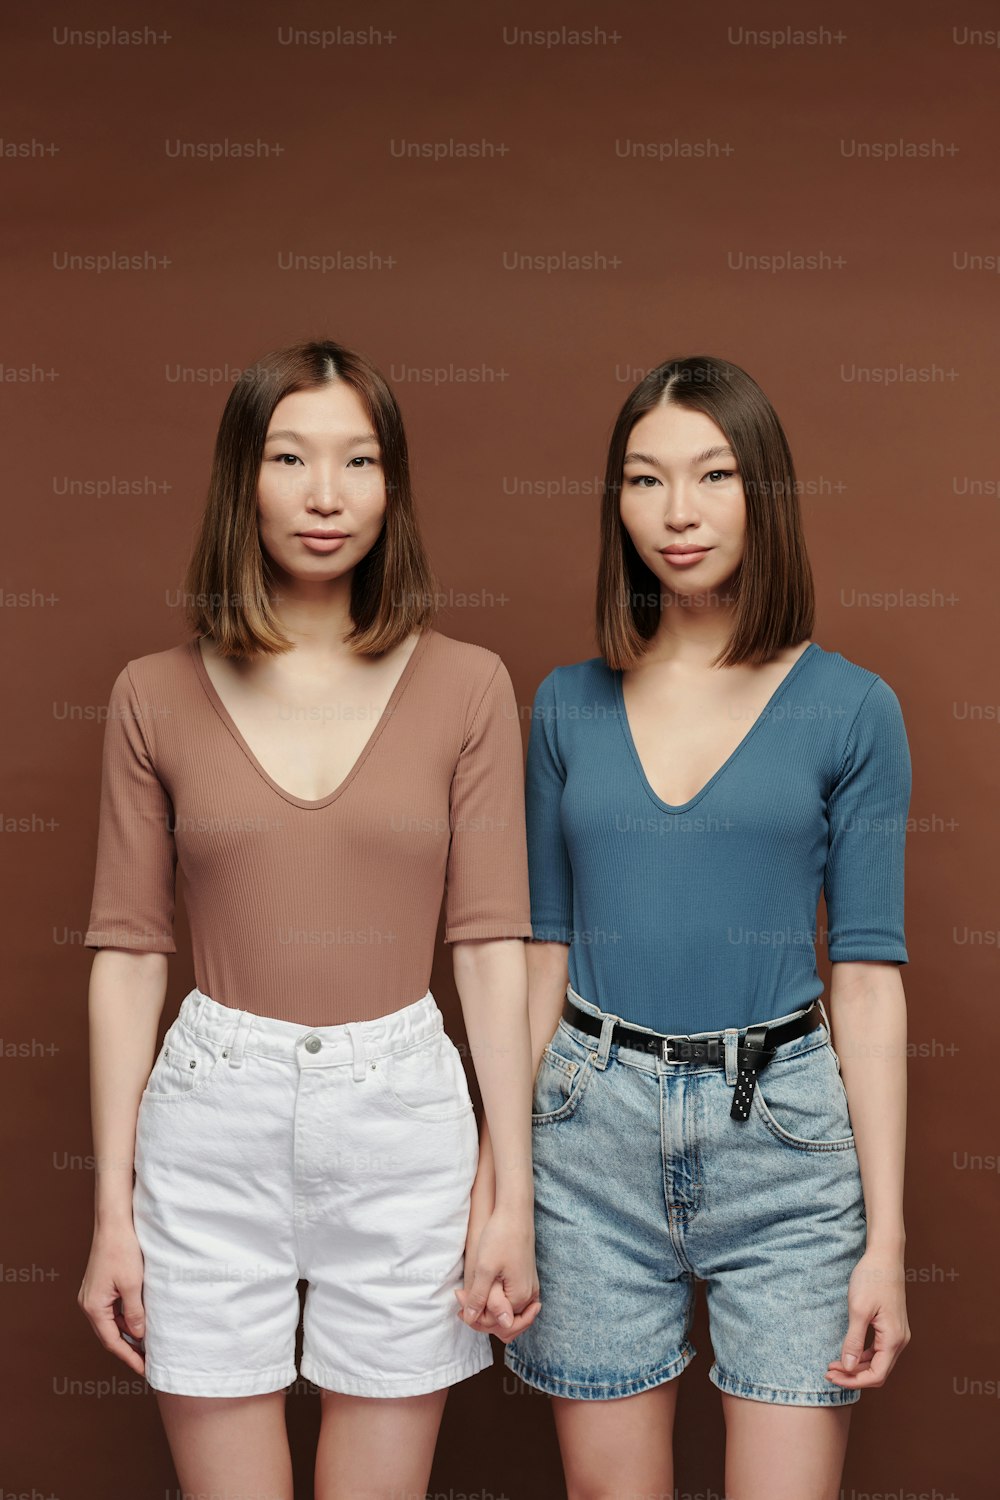 Young beautiful twin sisters in casual pullovers and shorts standing close to one another in front of camera against brown background in studio